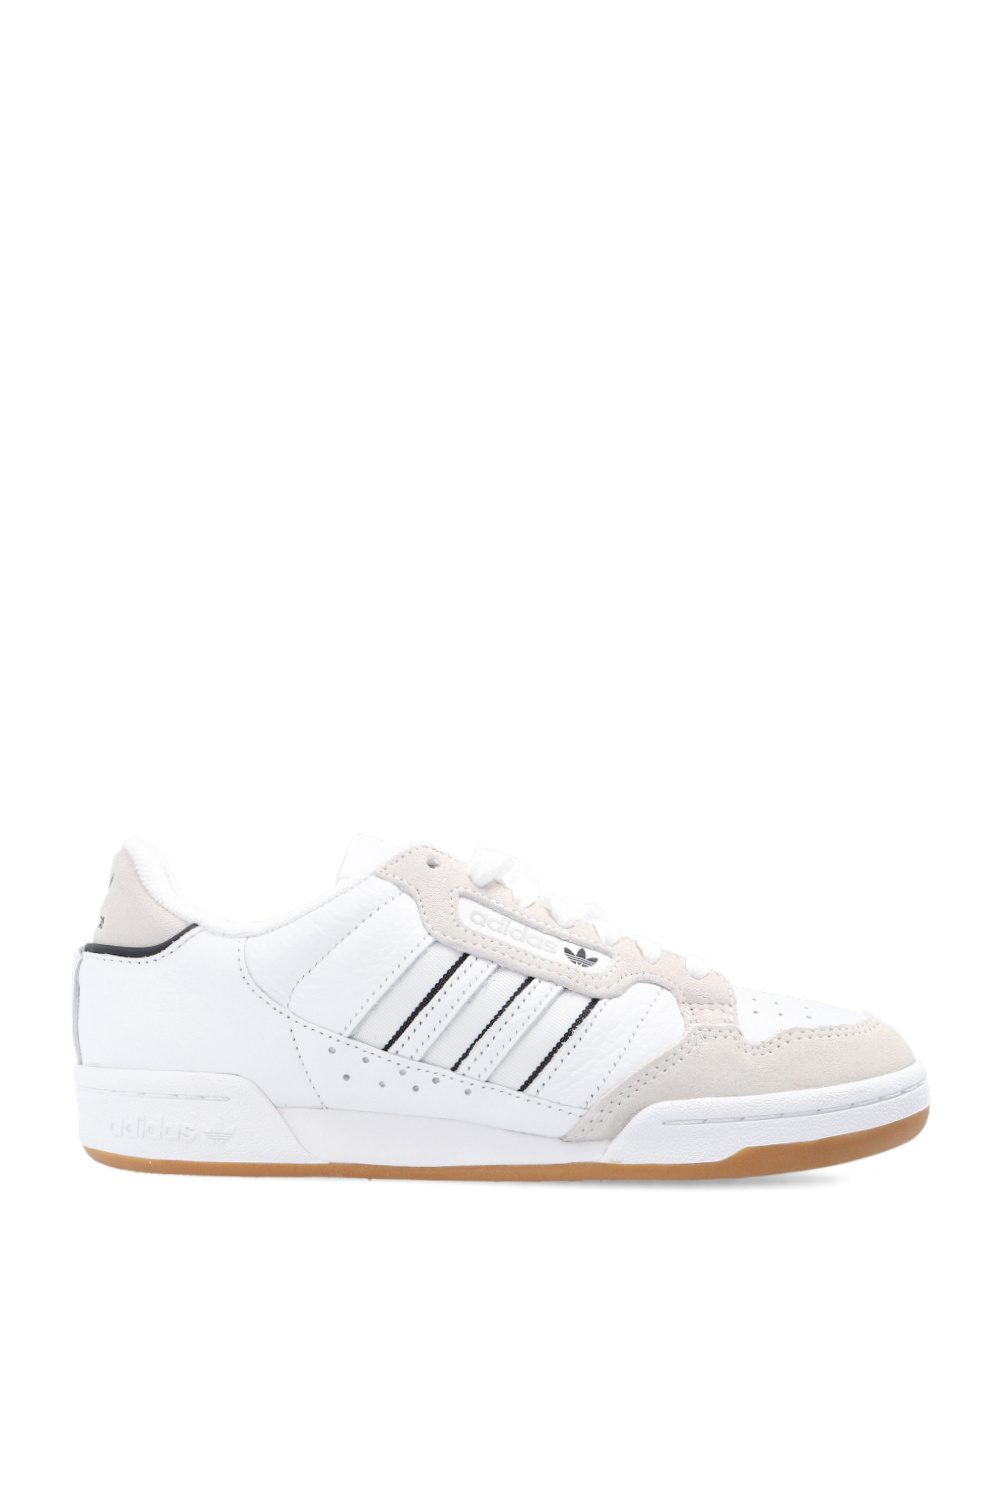 white Originals x nmd adidas 80 | \'Continental boost ADIDAS IetpShops Women\'s xr_1 champion | sneakers Stripes\' Shoes |